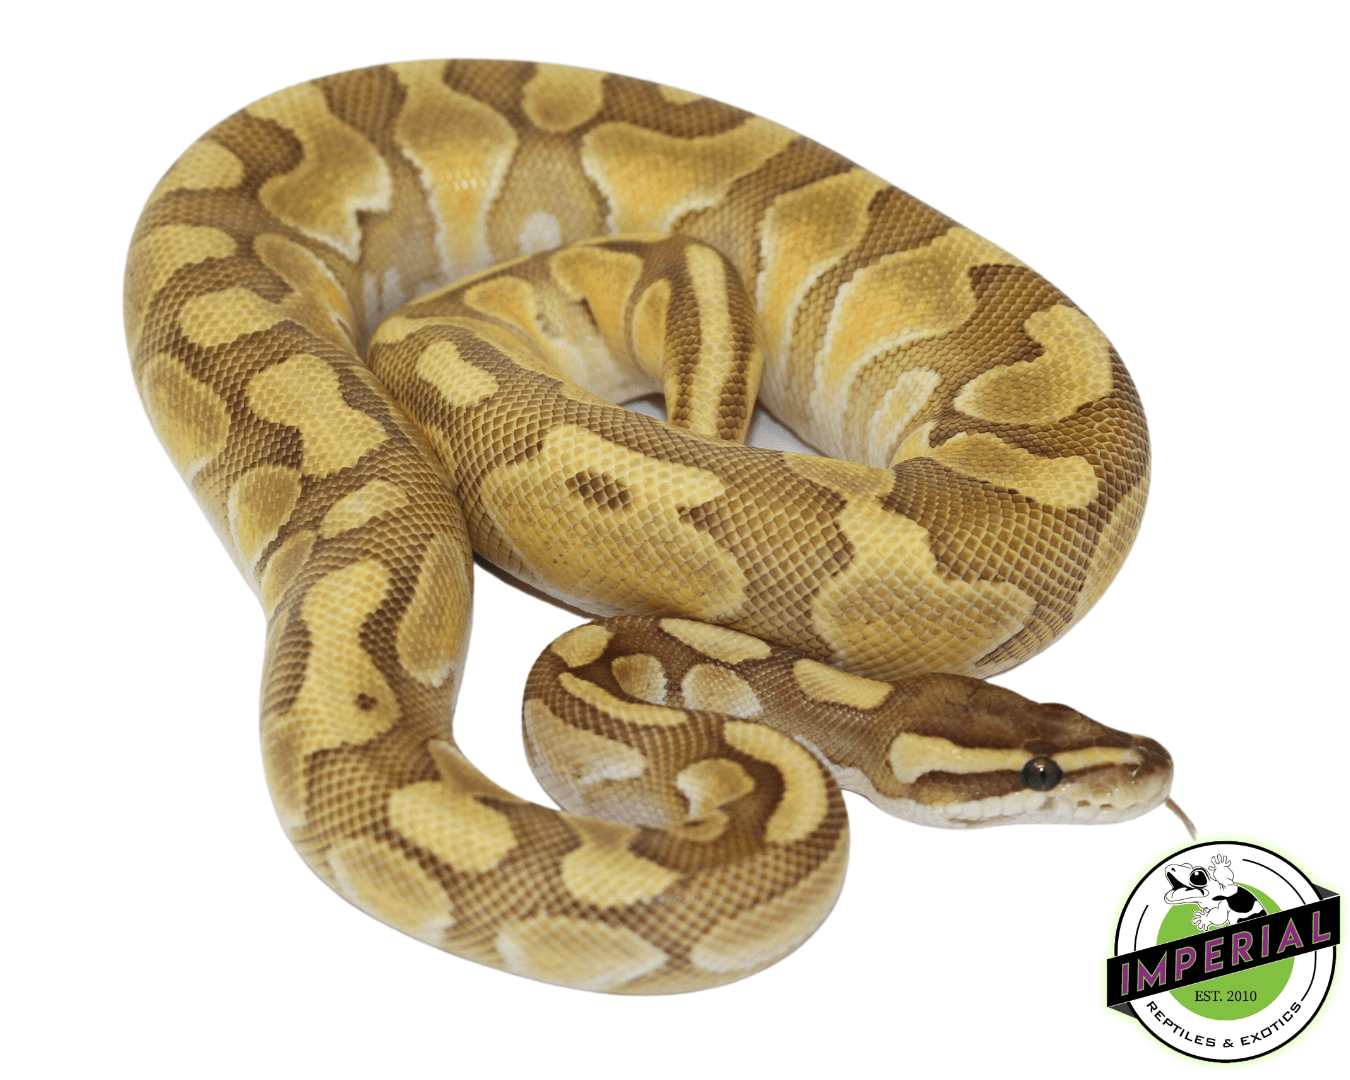 Lesser Enchi ball python for sale, buy reptiles online